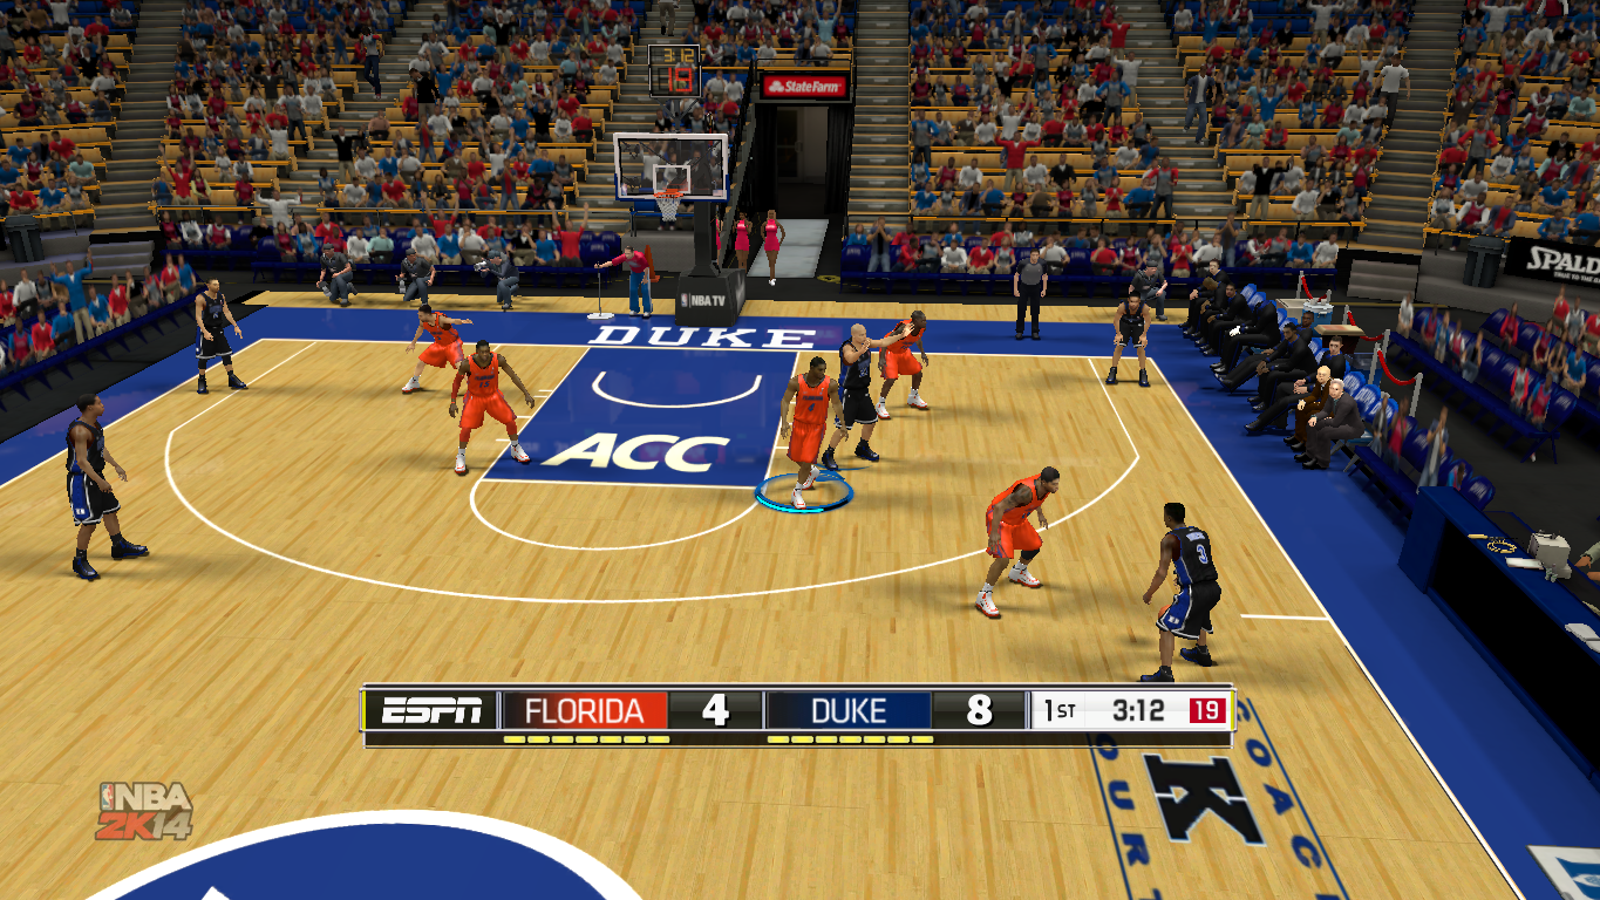 Modders Keep College Basketball Alive with 'March Madness 2K14' on PC